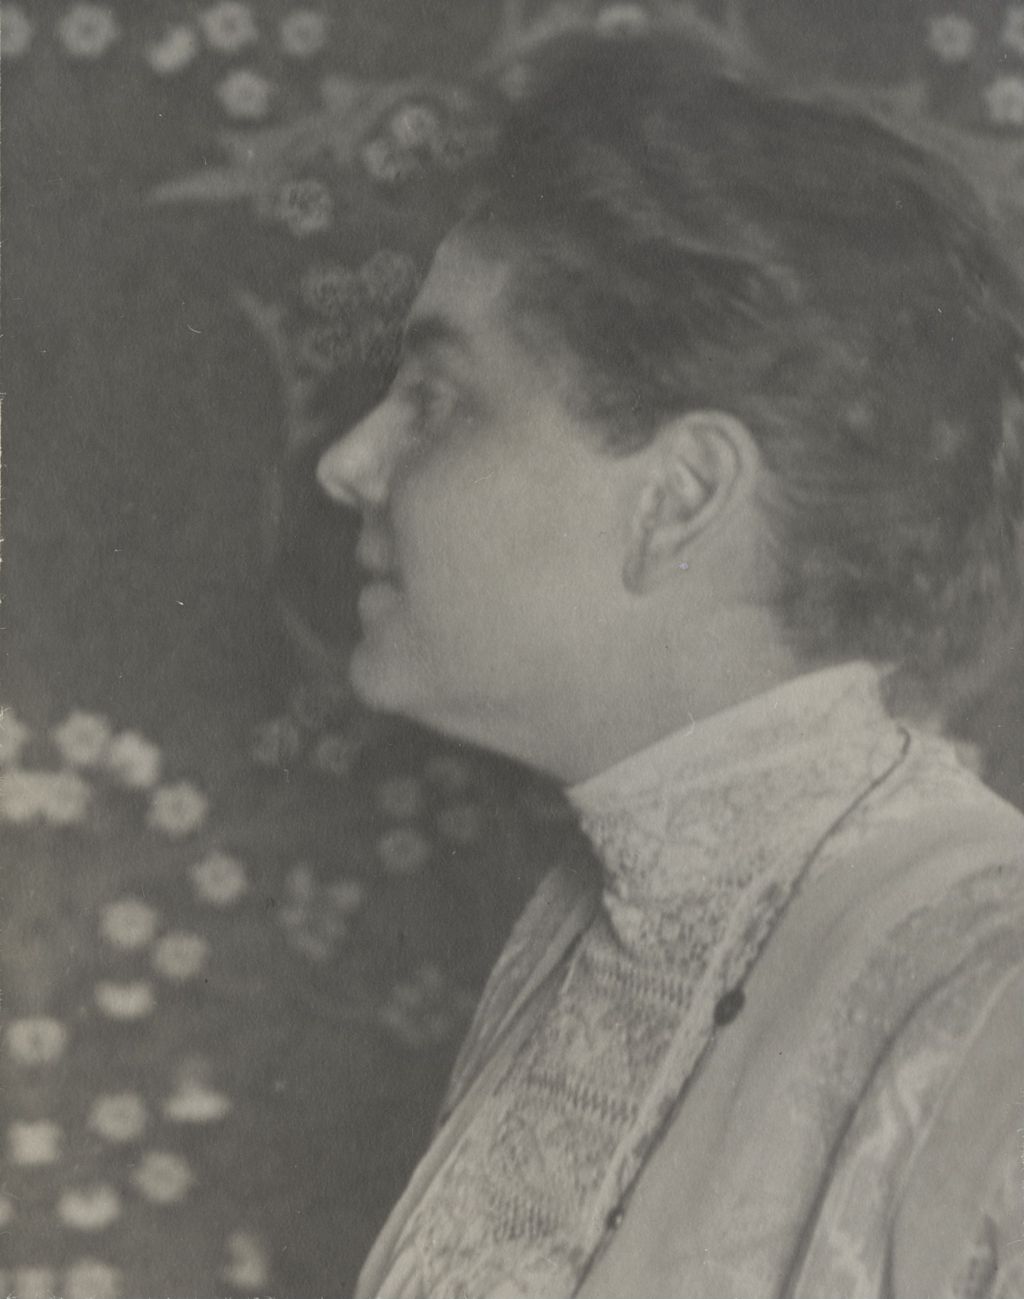 Hull-House resident and trustee Mary Rozet Smith